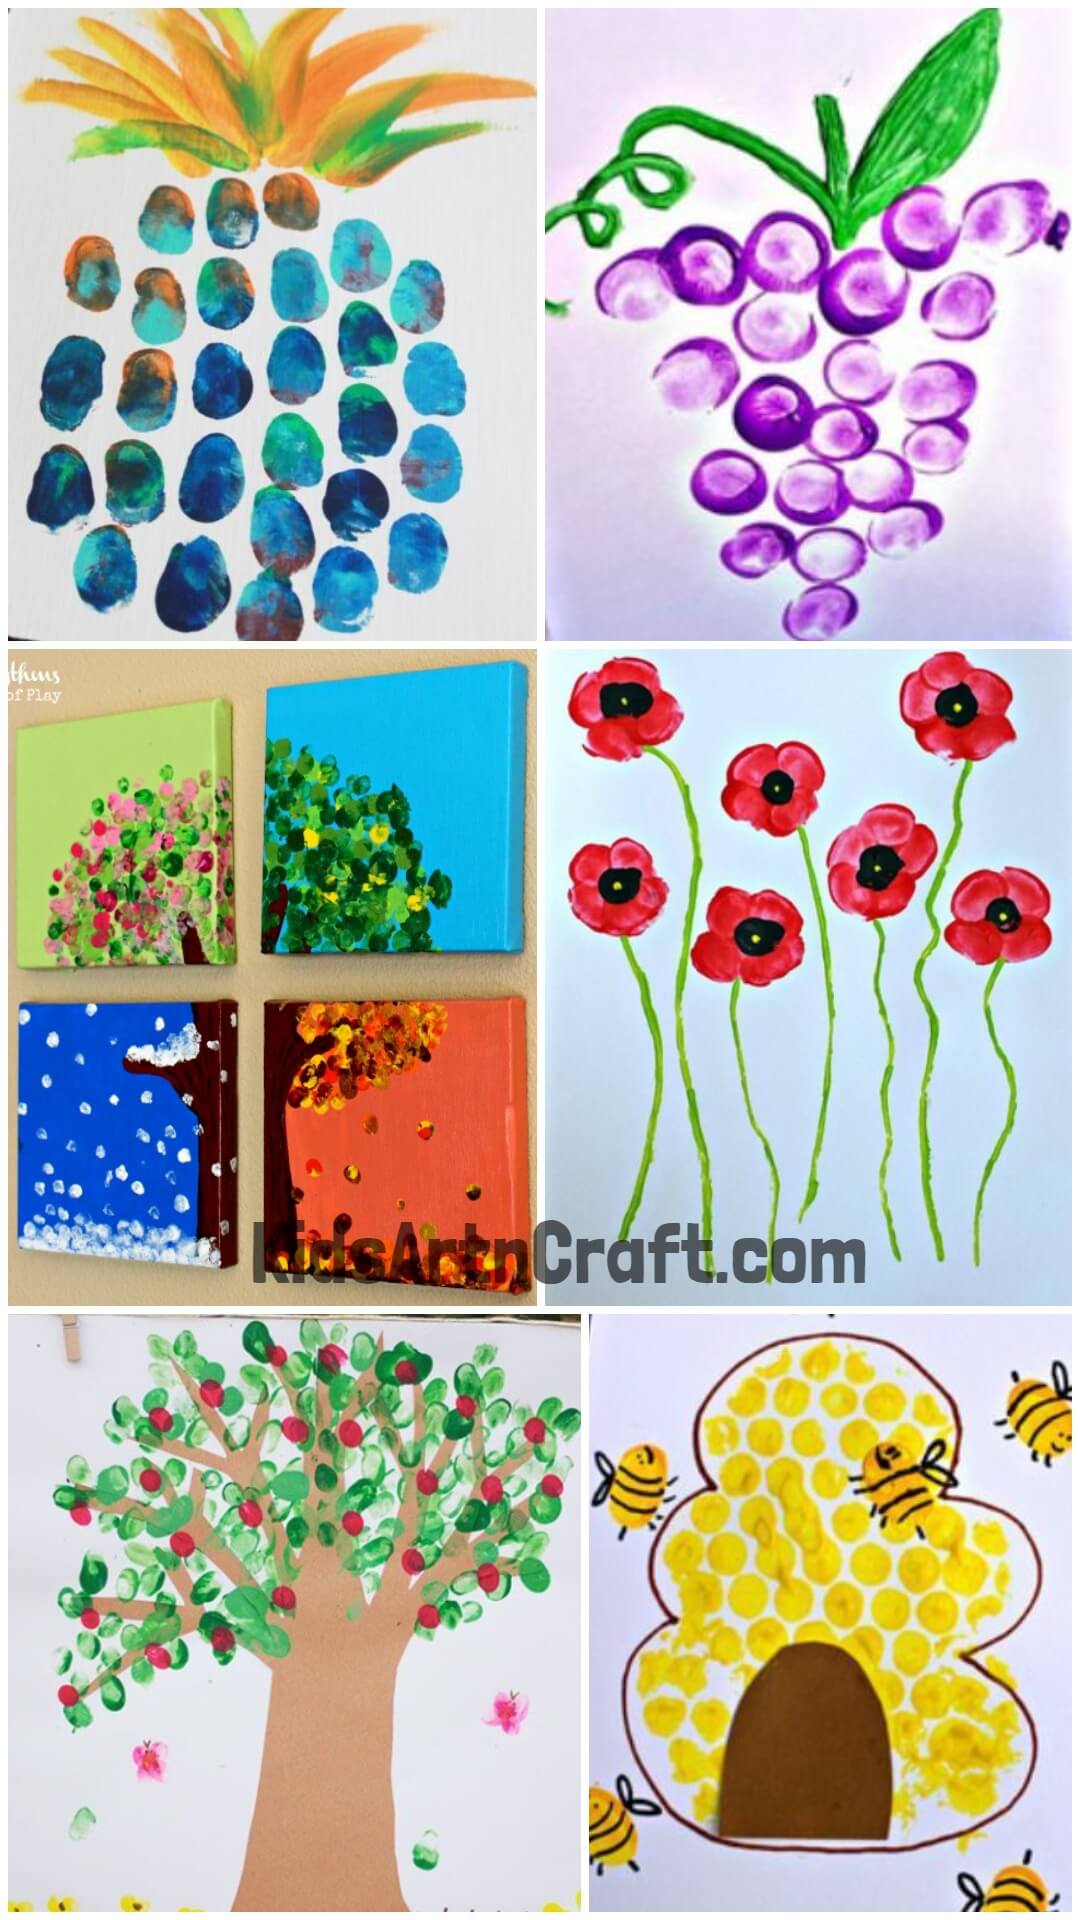 Awesome and Fun Fingerprint Crafts for Kids